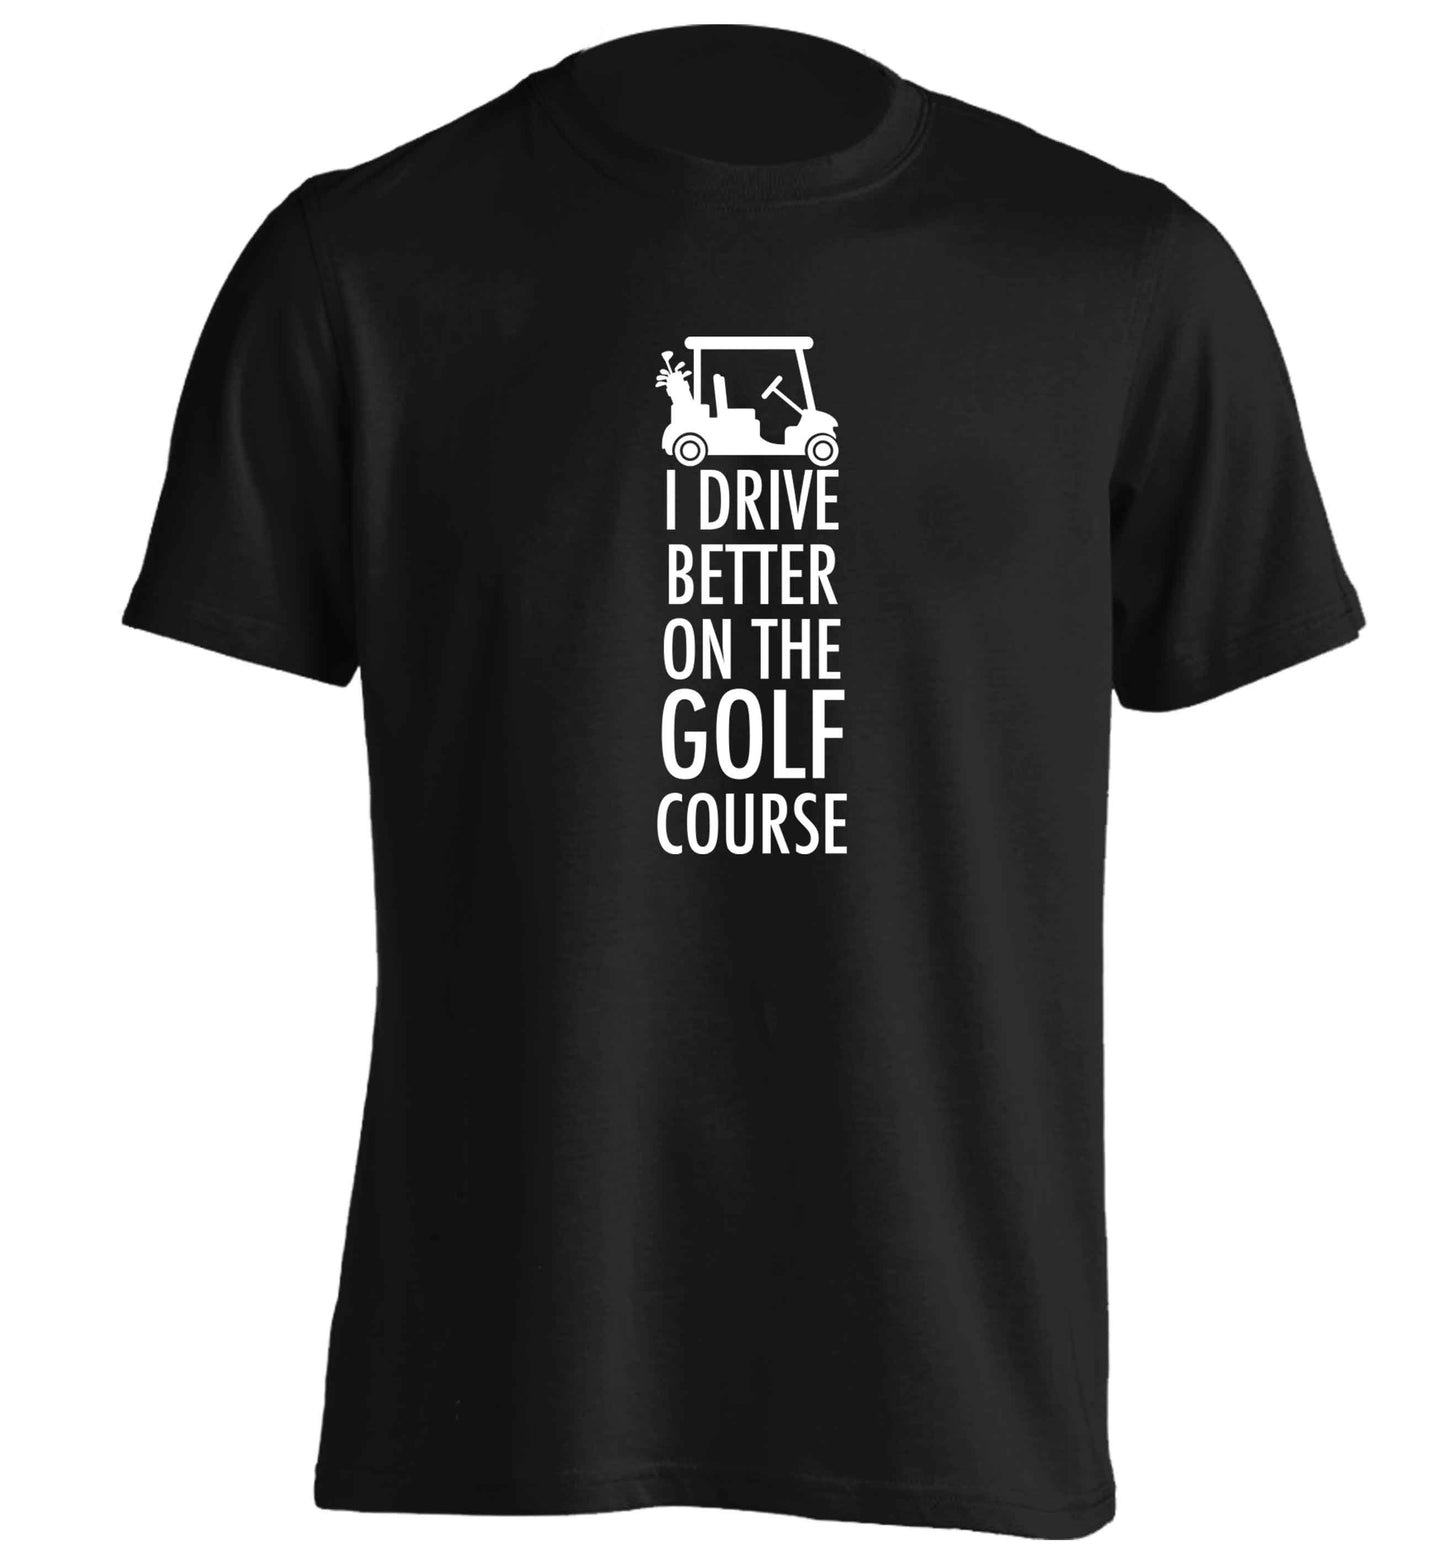 I drive better on the golf course adults unisex black Tshirt 2XL